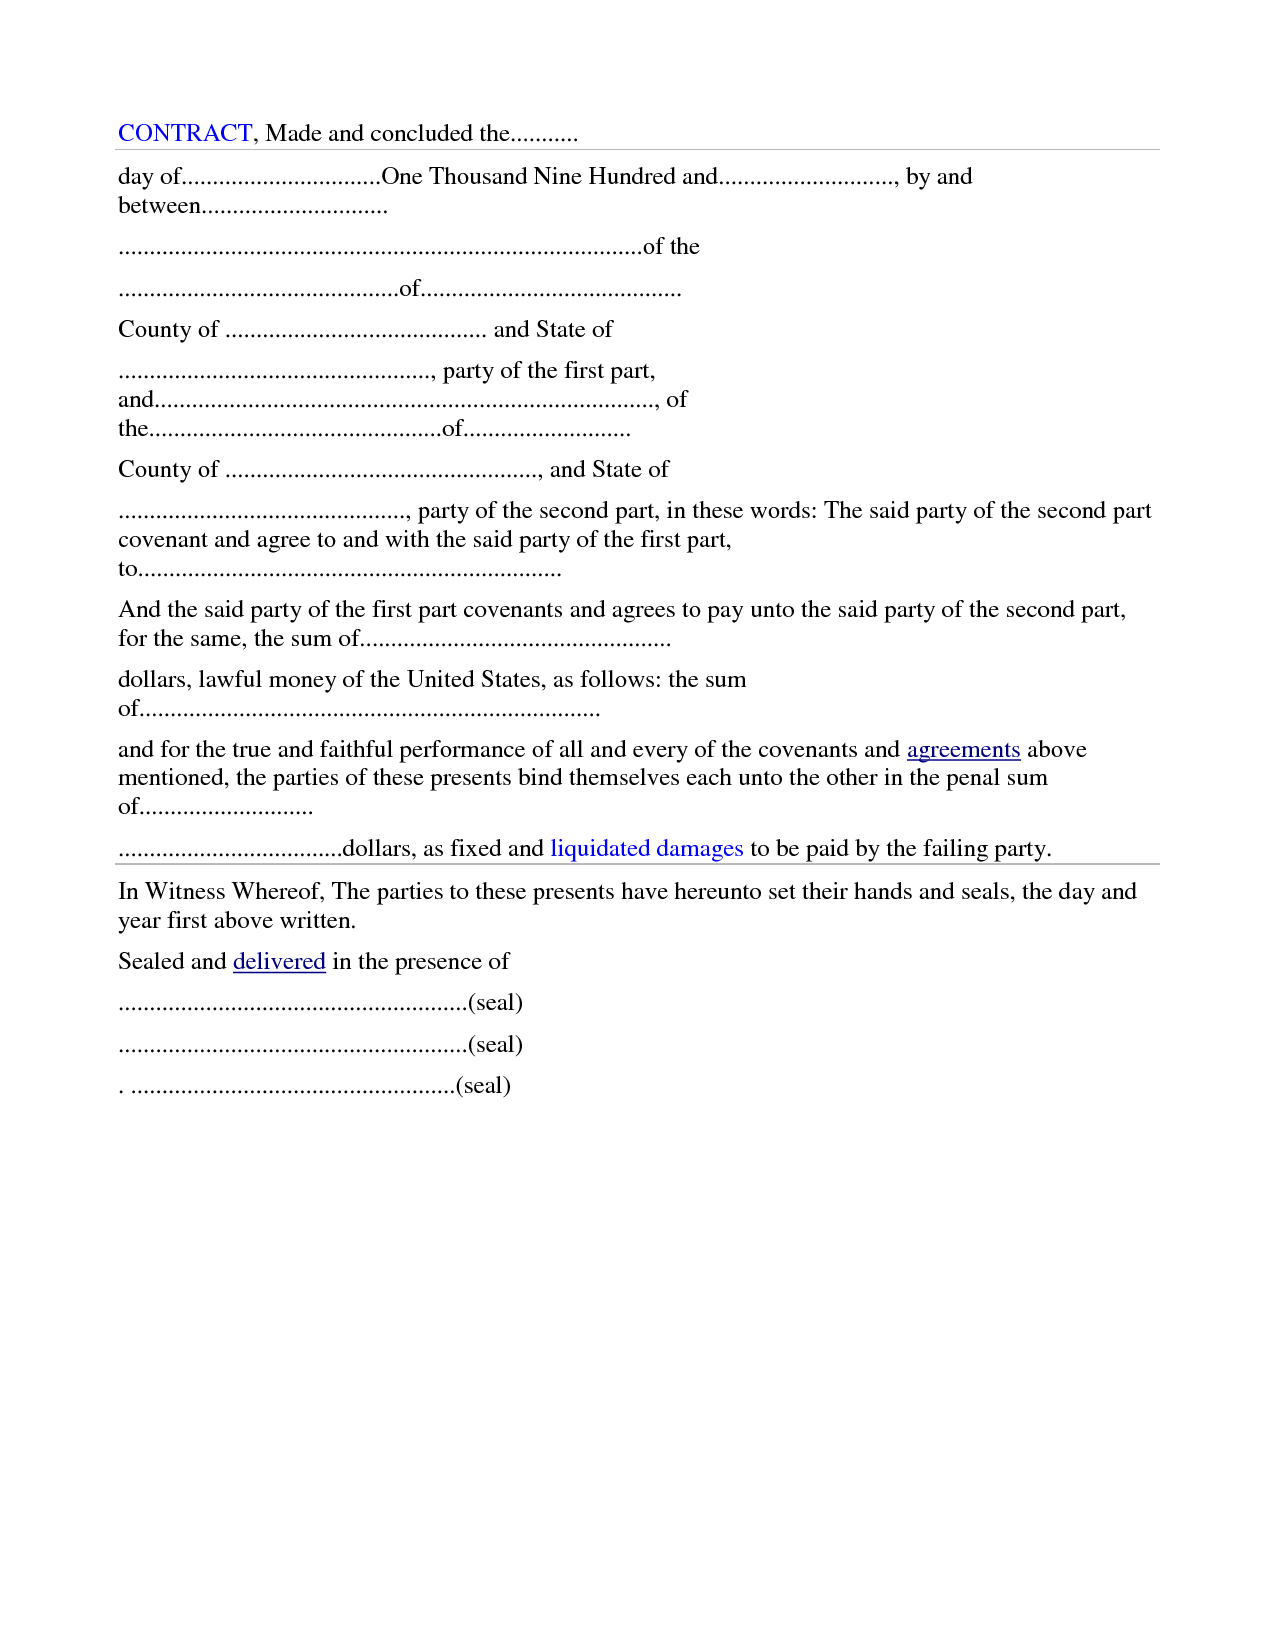 printable-blank-contract-forms-printable-forms-free-online